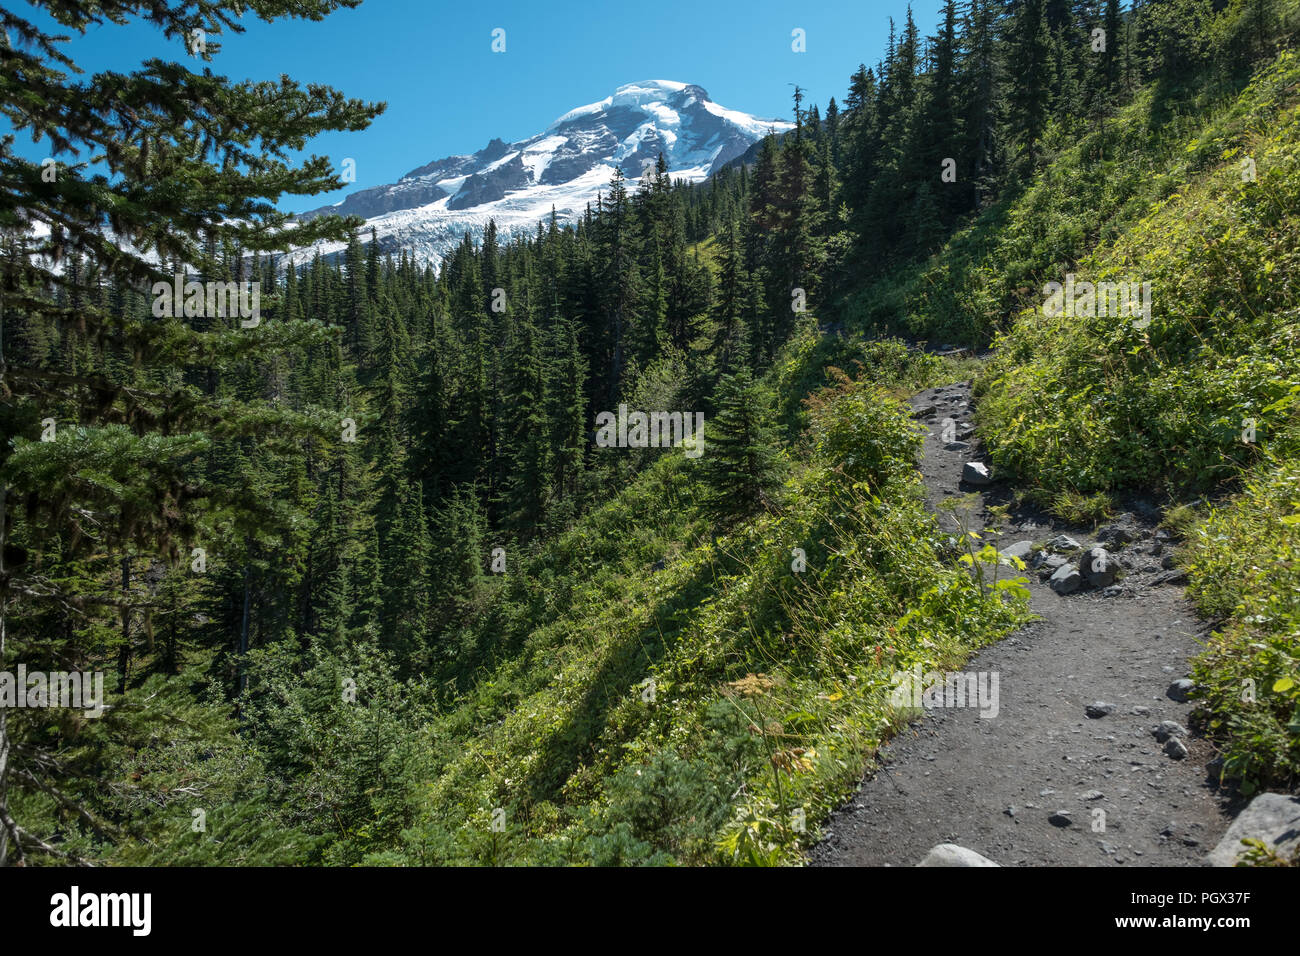 View looking up the Heliotrope Ridge hiking trail on the west flank of Washington State's spectacular Mount Baker.  Trail passes through beautiful for Stock Photo